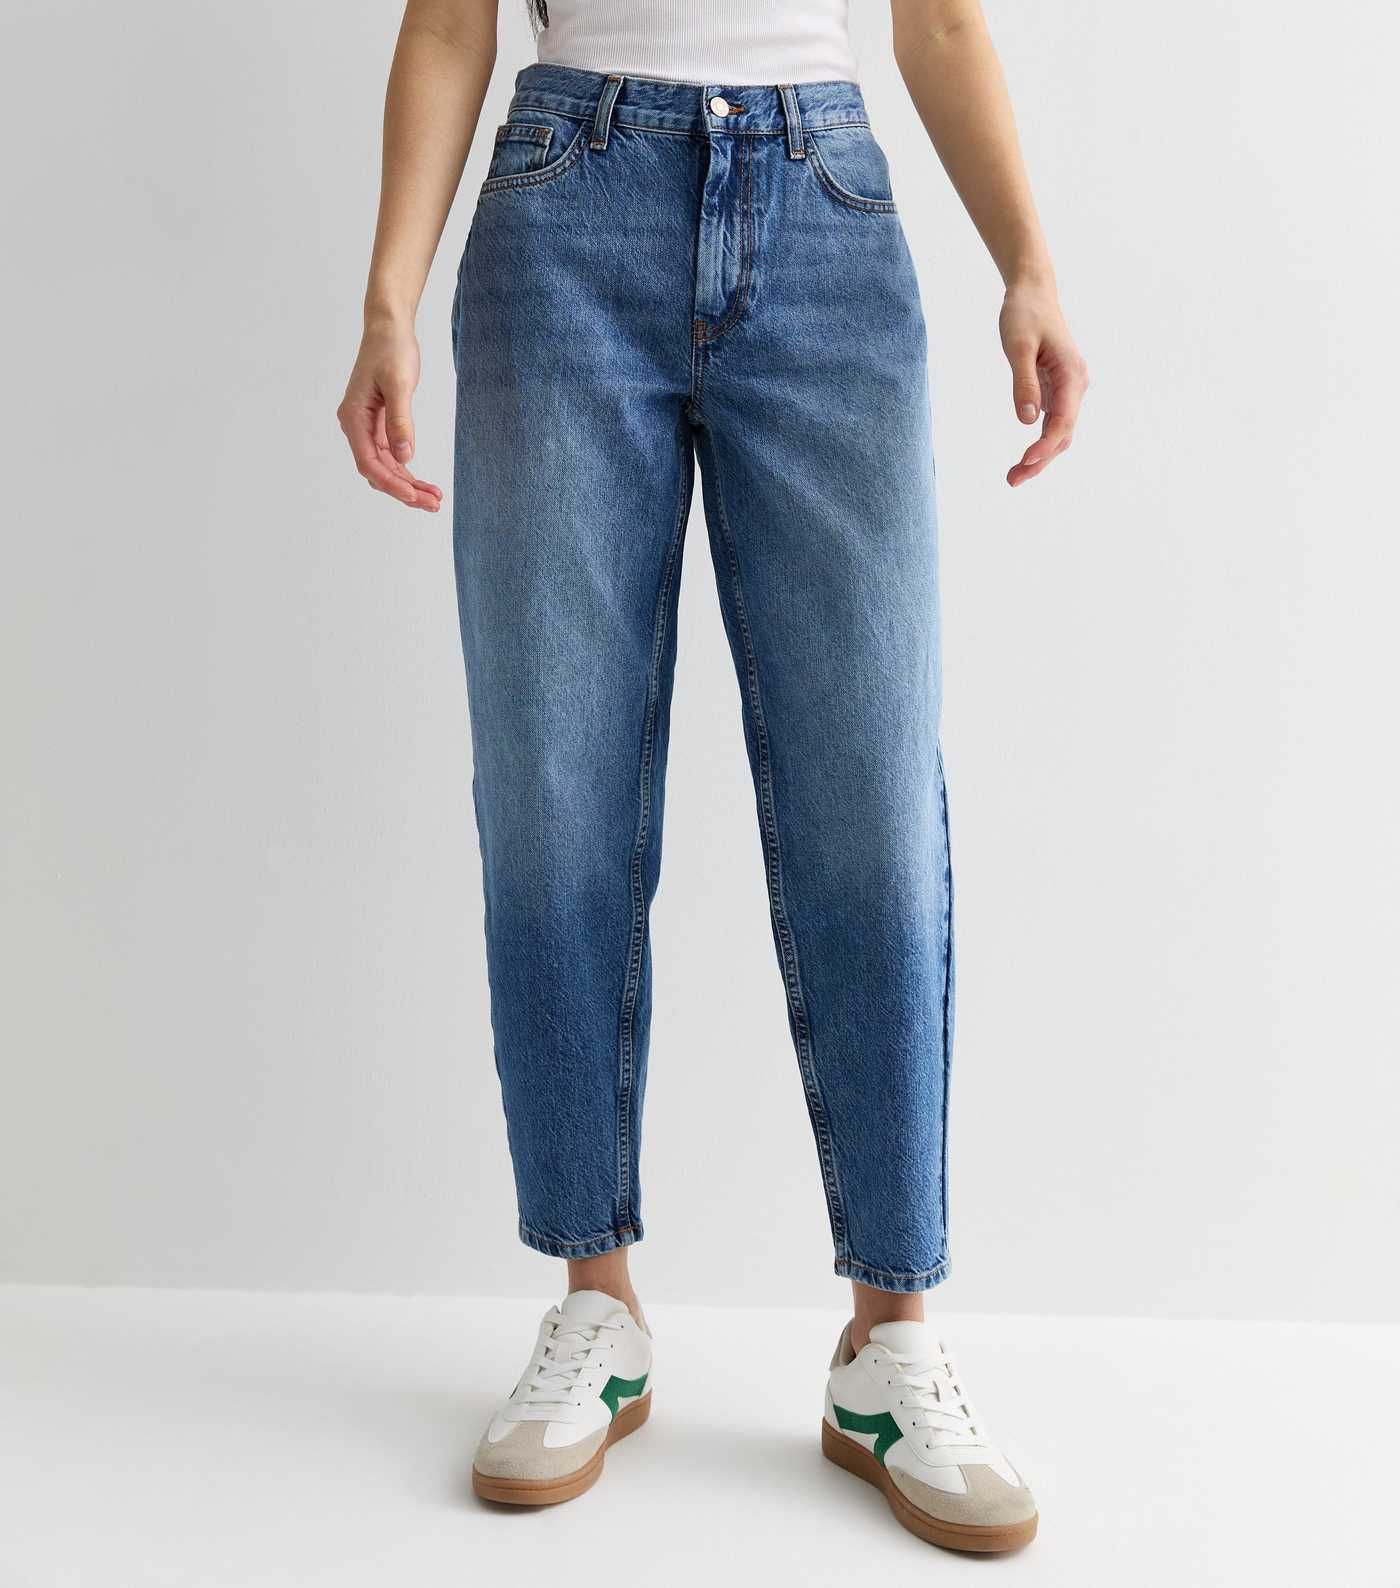 Blue High Waist Barrel Leg Jeans
						
						Add to Saved Items
						Remove from Saved Items | New Look (UK)